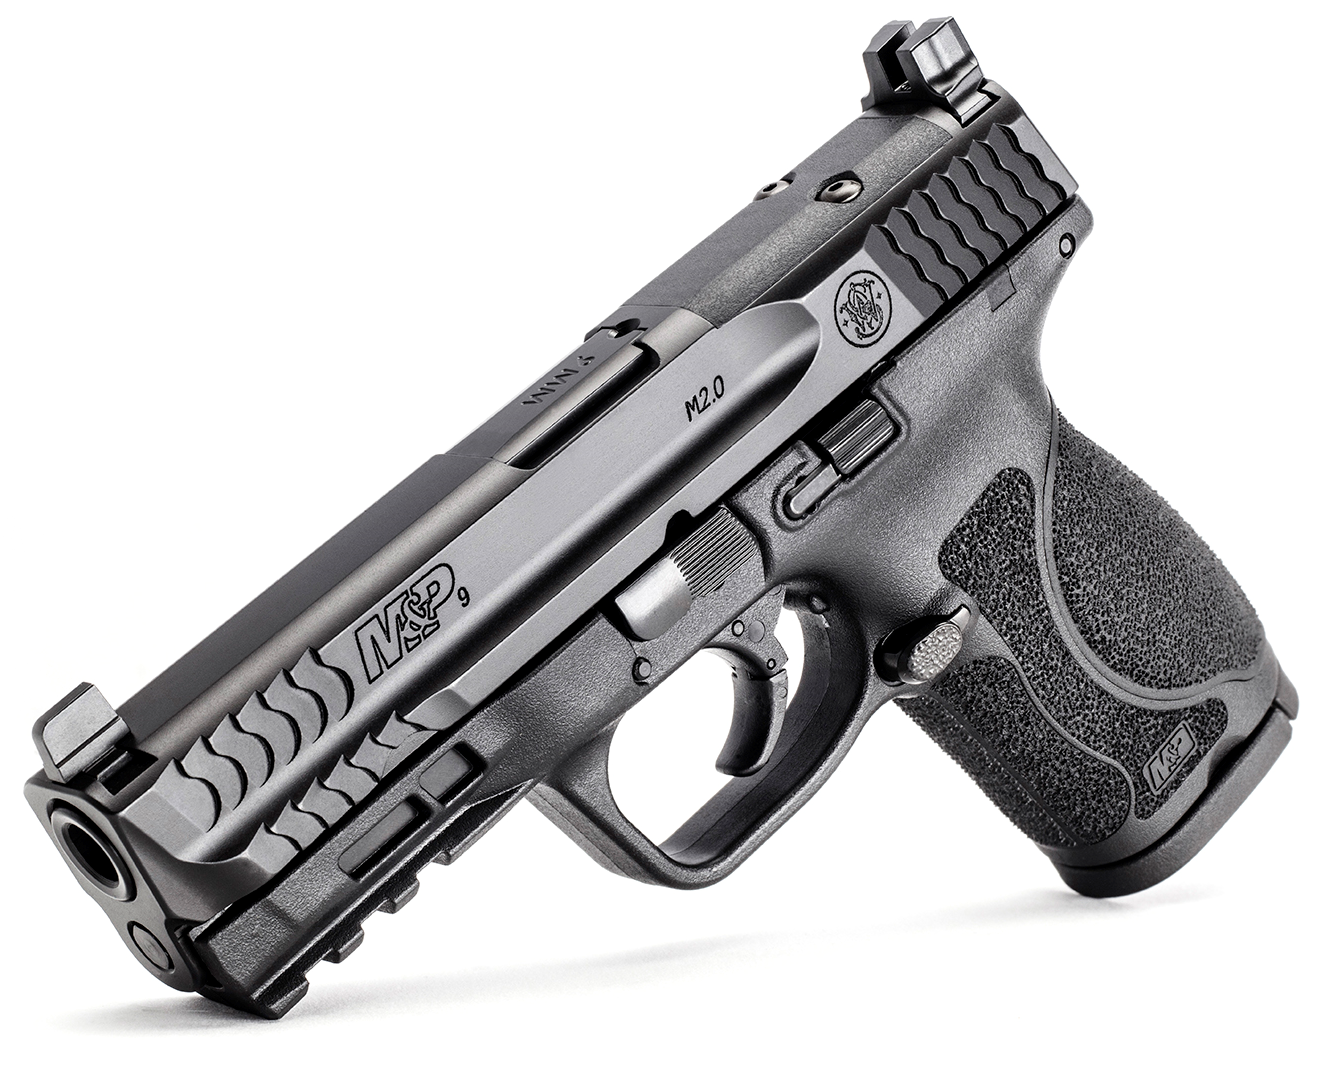 Smith And Wesson Optics Ready Mandp9 M20 Compact Pistol The Firearm Blog